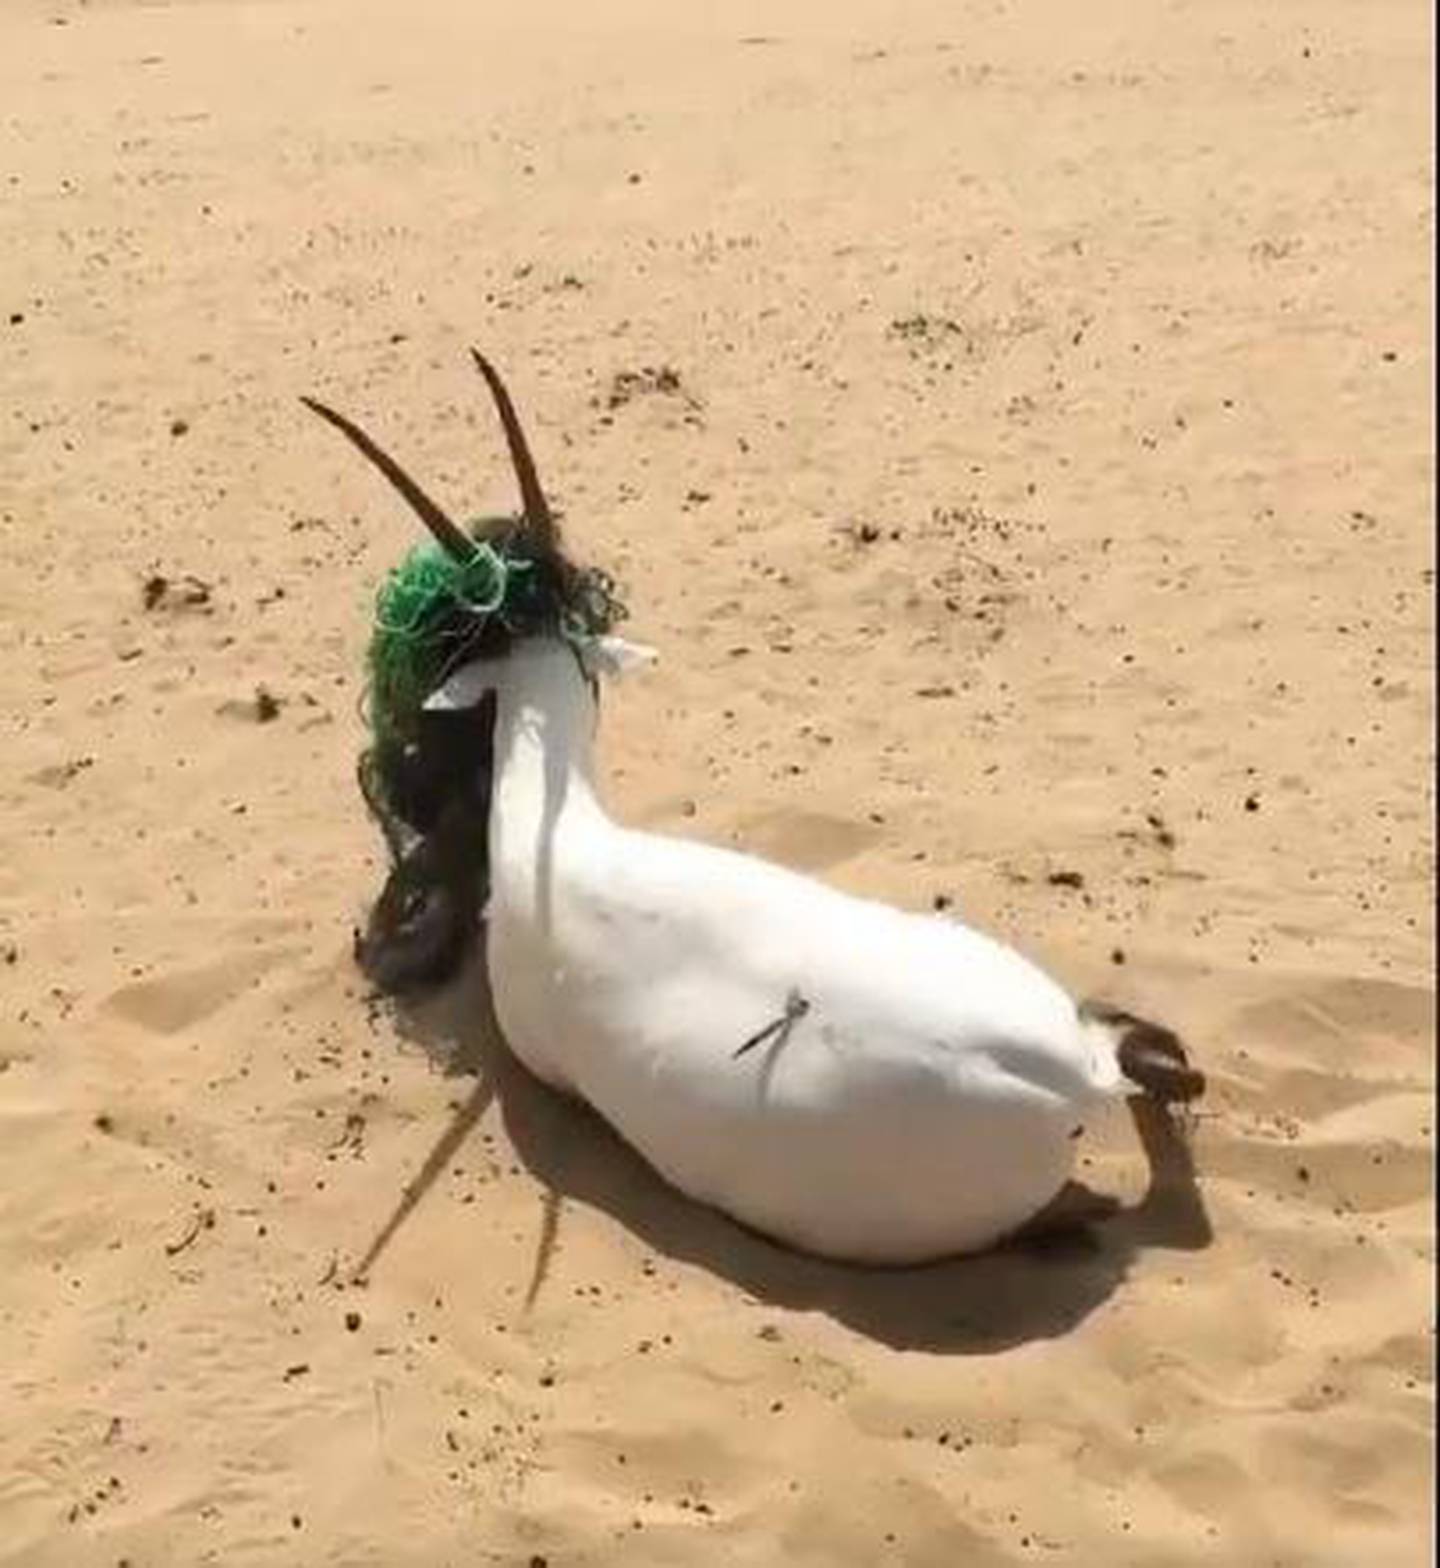 The oryx was tangled in what appeared to be discarded netting. Courtesy: Sheikh Hamdan Twitter